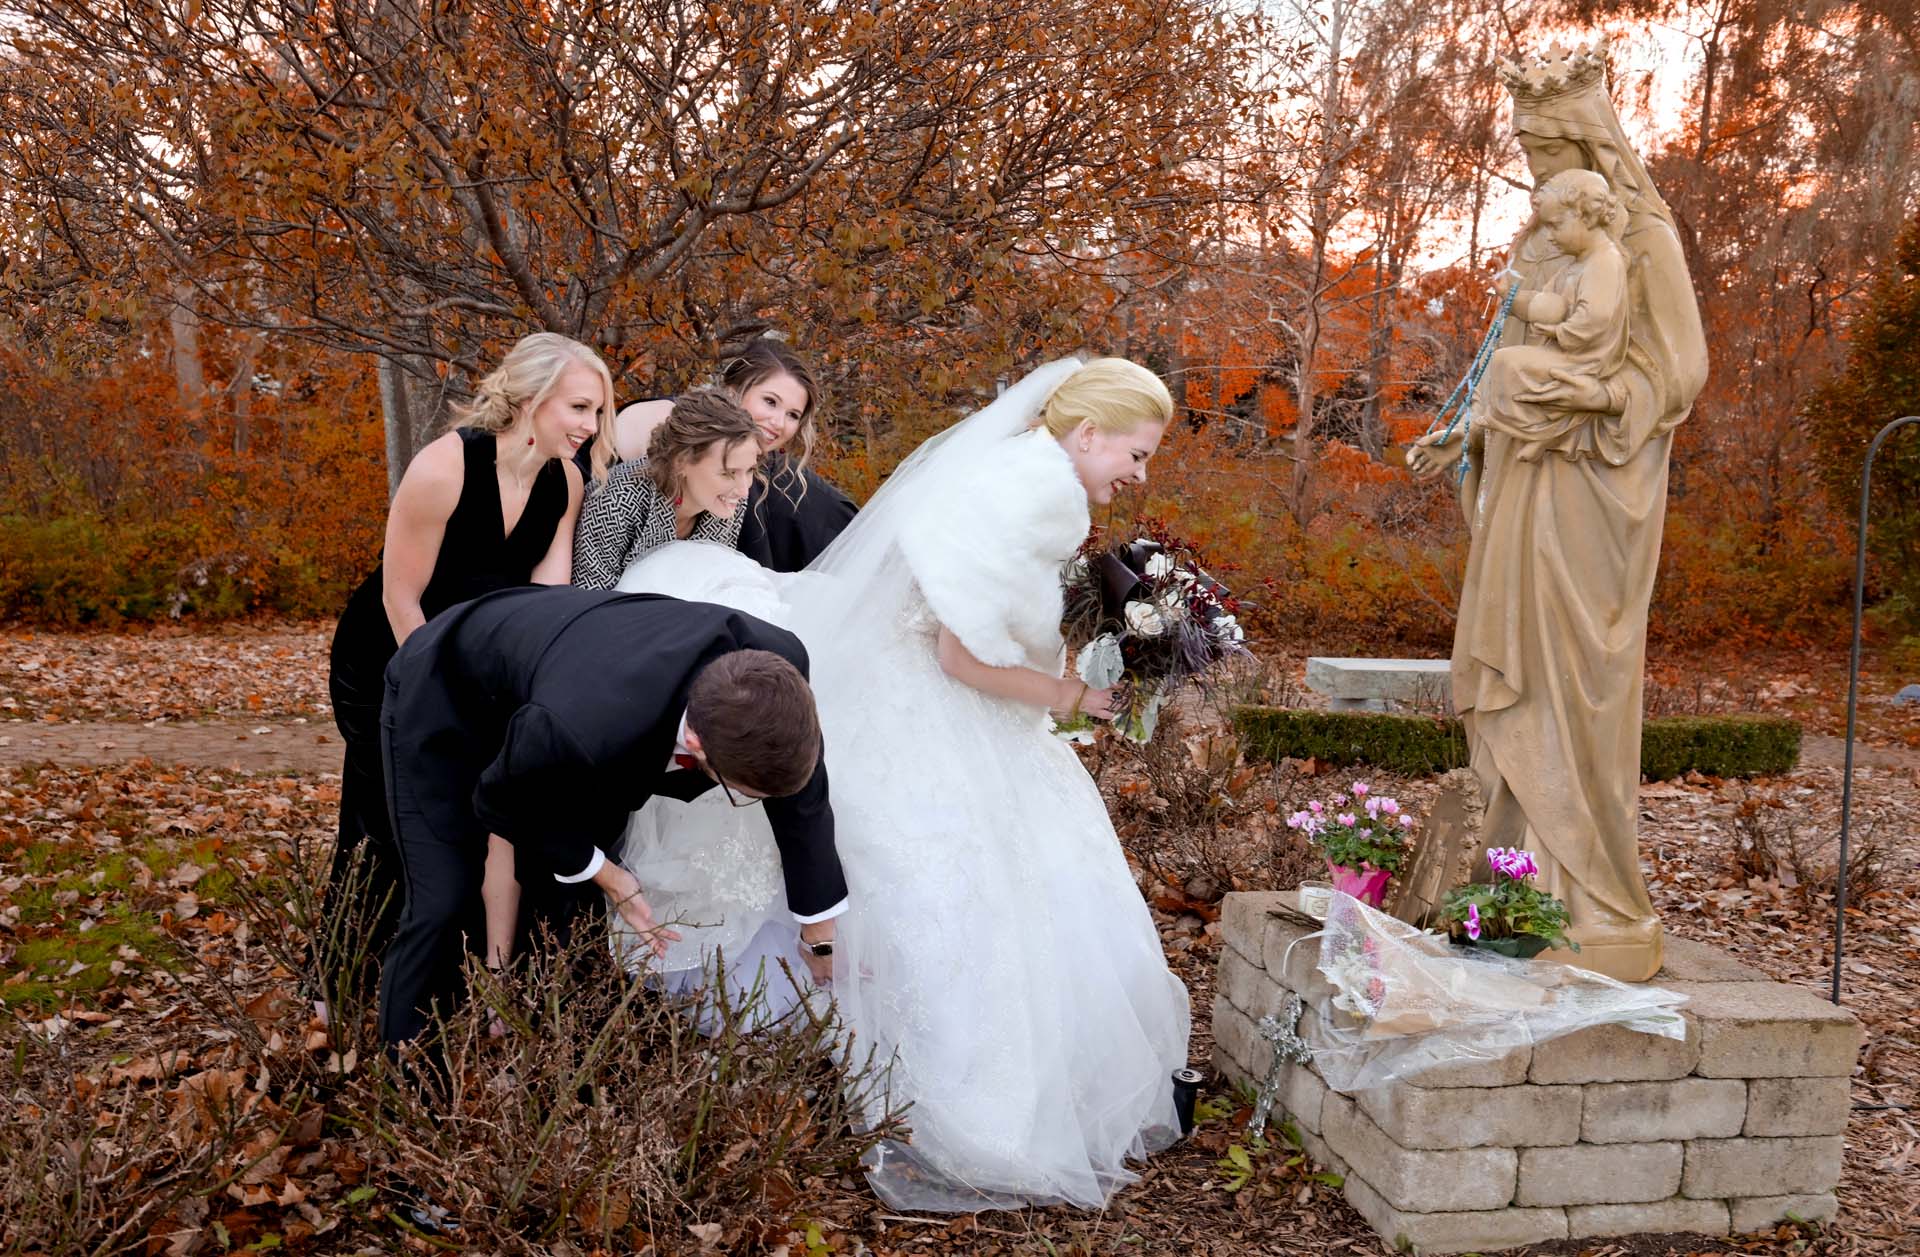 The bride tries to place her offering of flowers to St. Therese as a blessing, but snagged on the rosebushes at the altar at the St. Therese of Lisieux Catholic Church in Shelby Twp., Michigan.